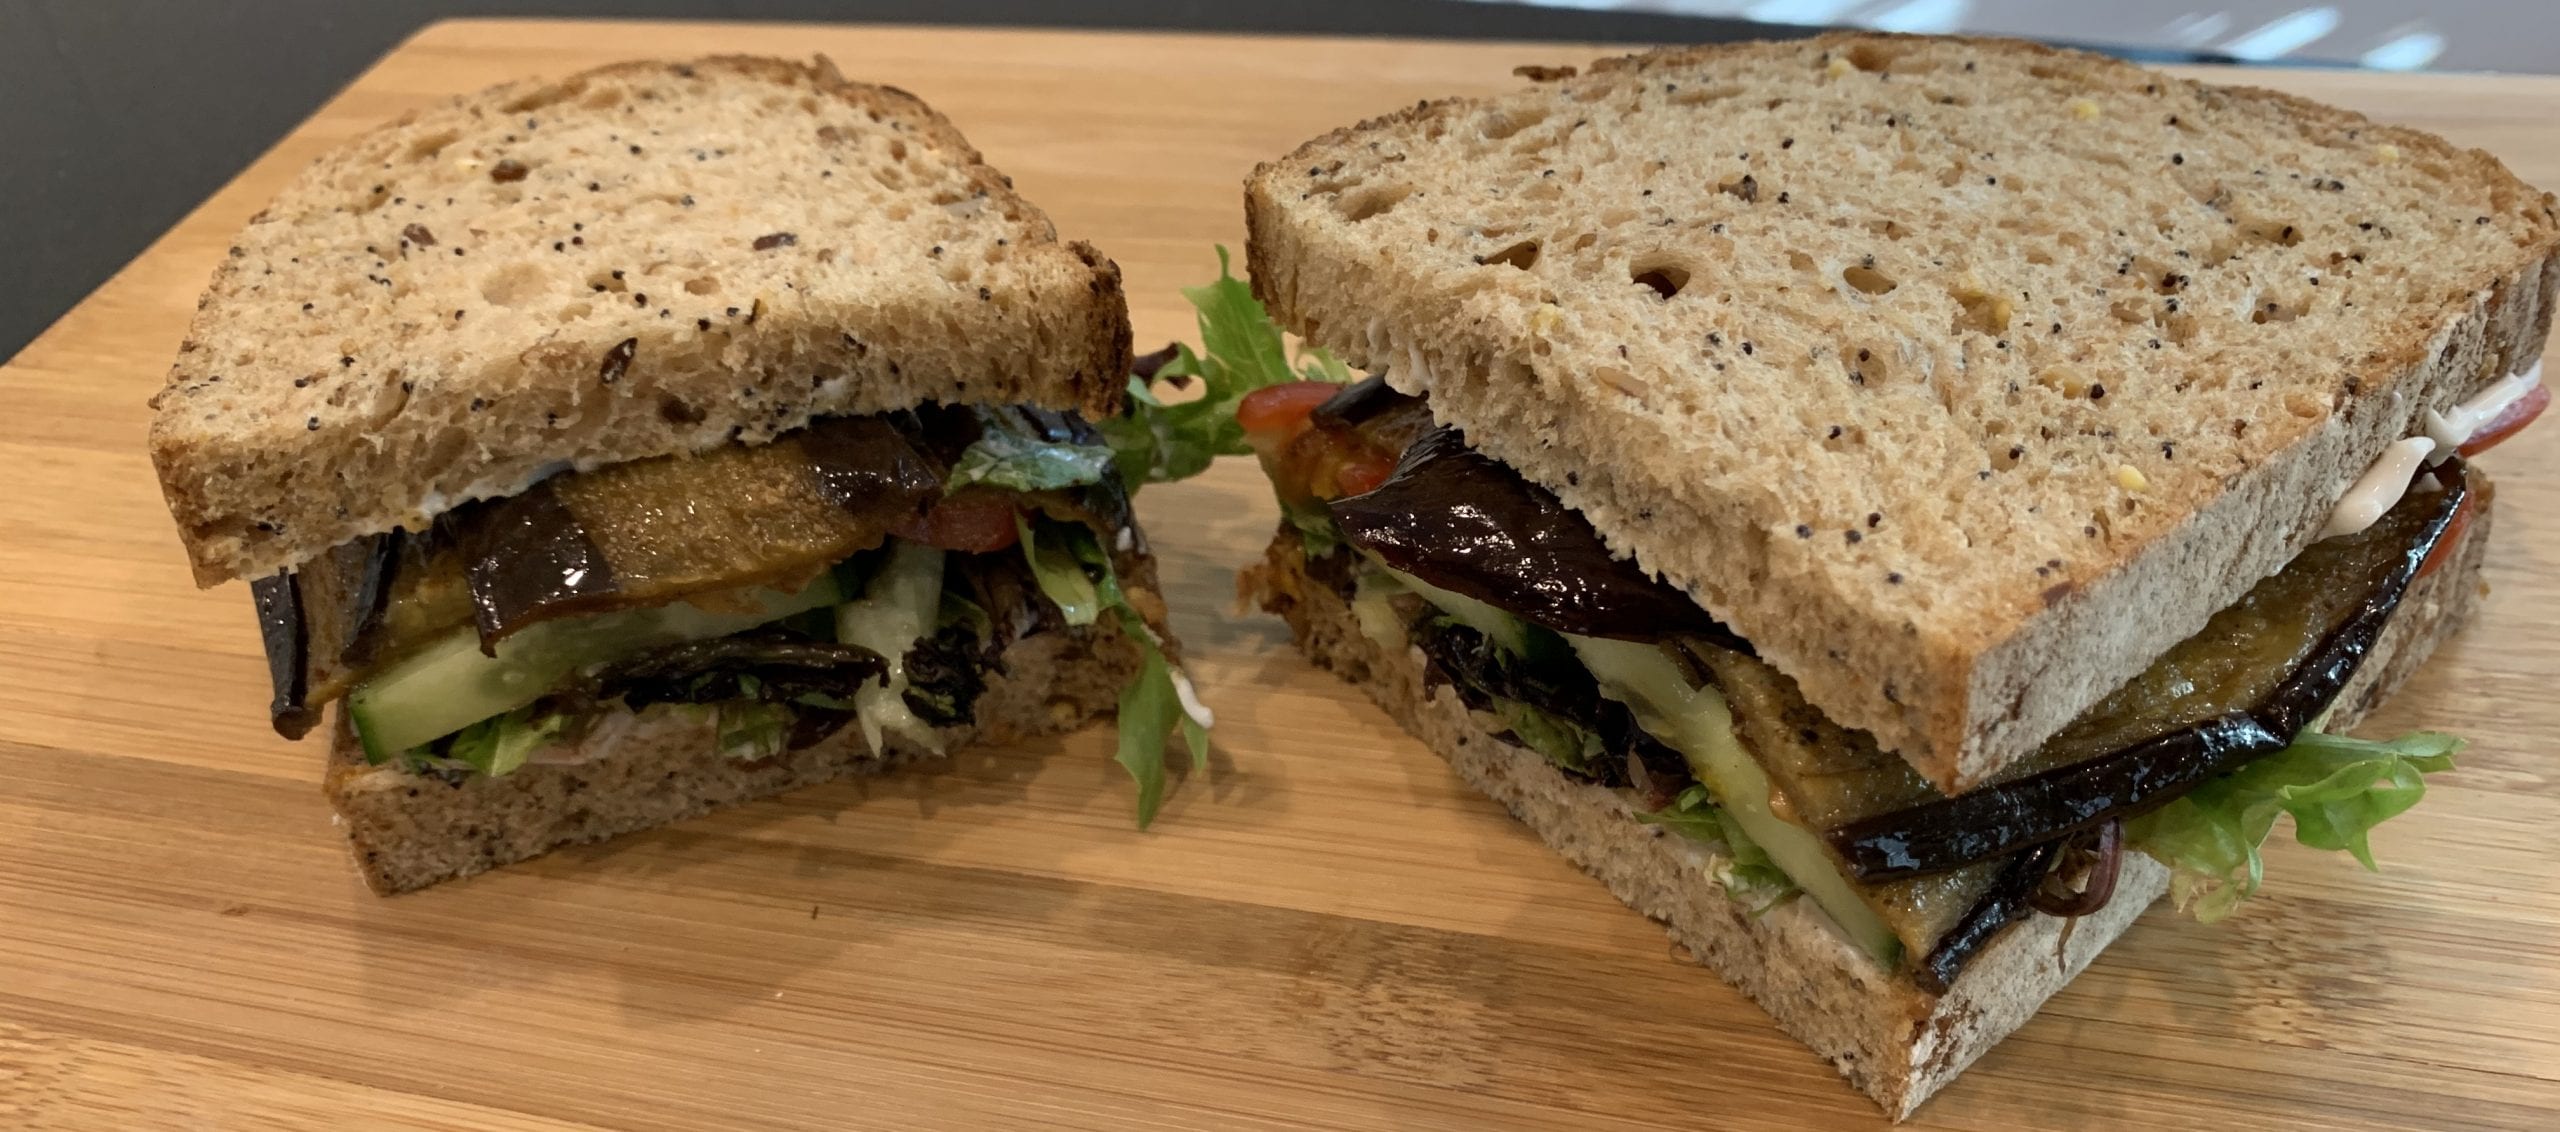 Roasted Aubergine Sandwich - The Plant based dad